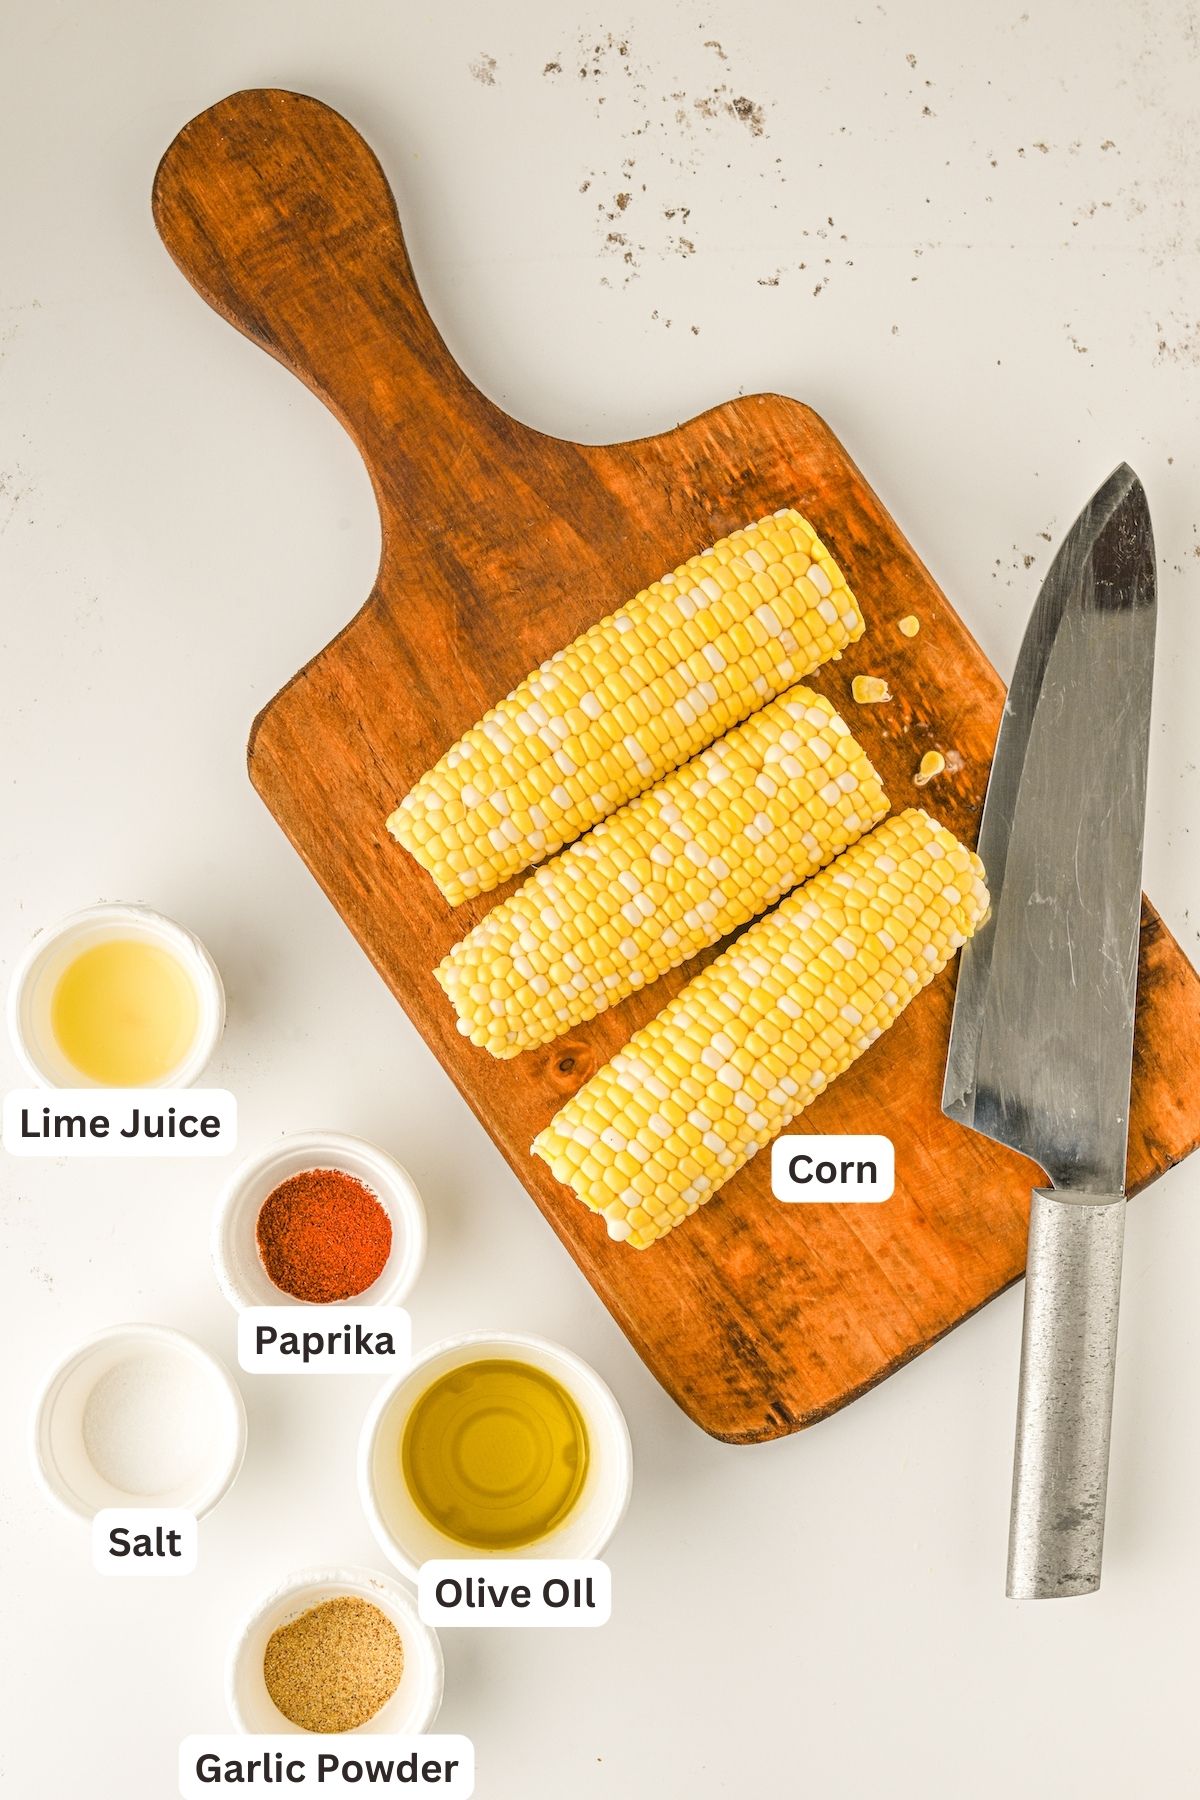 Ingredients for Corn Ribs recipe.